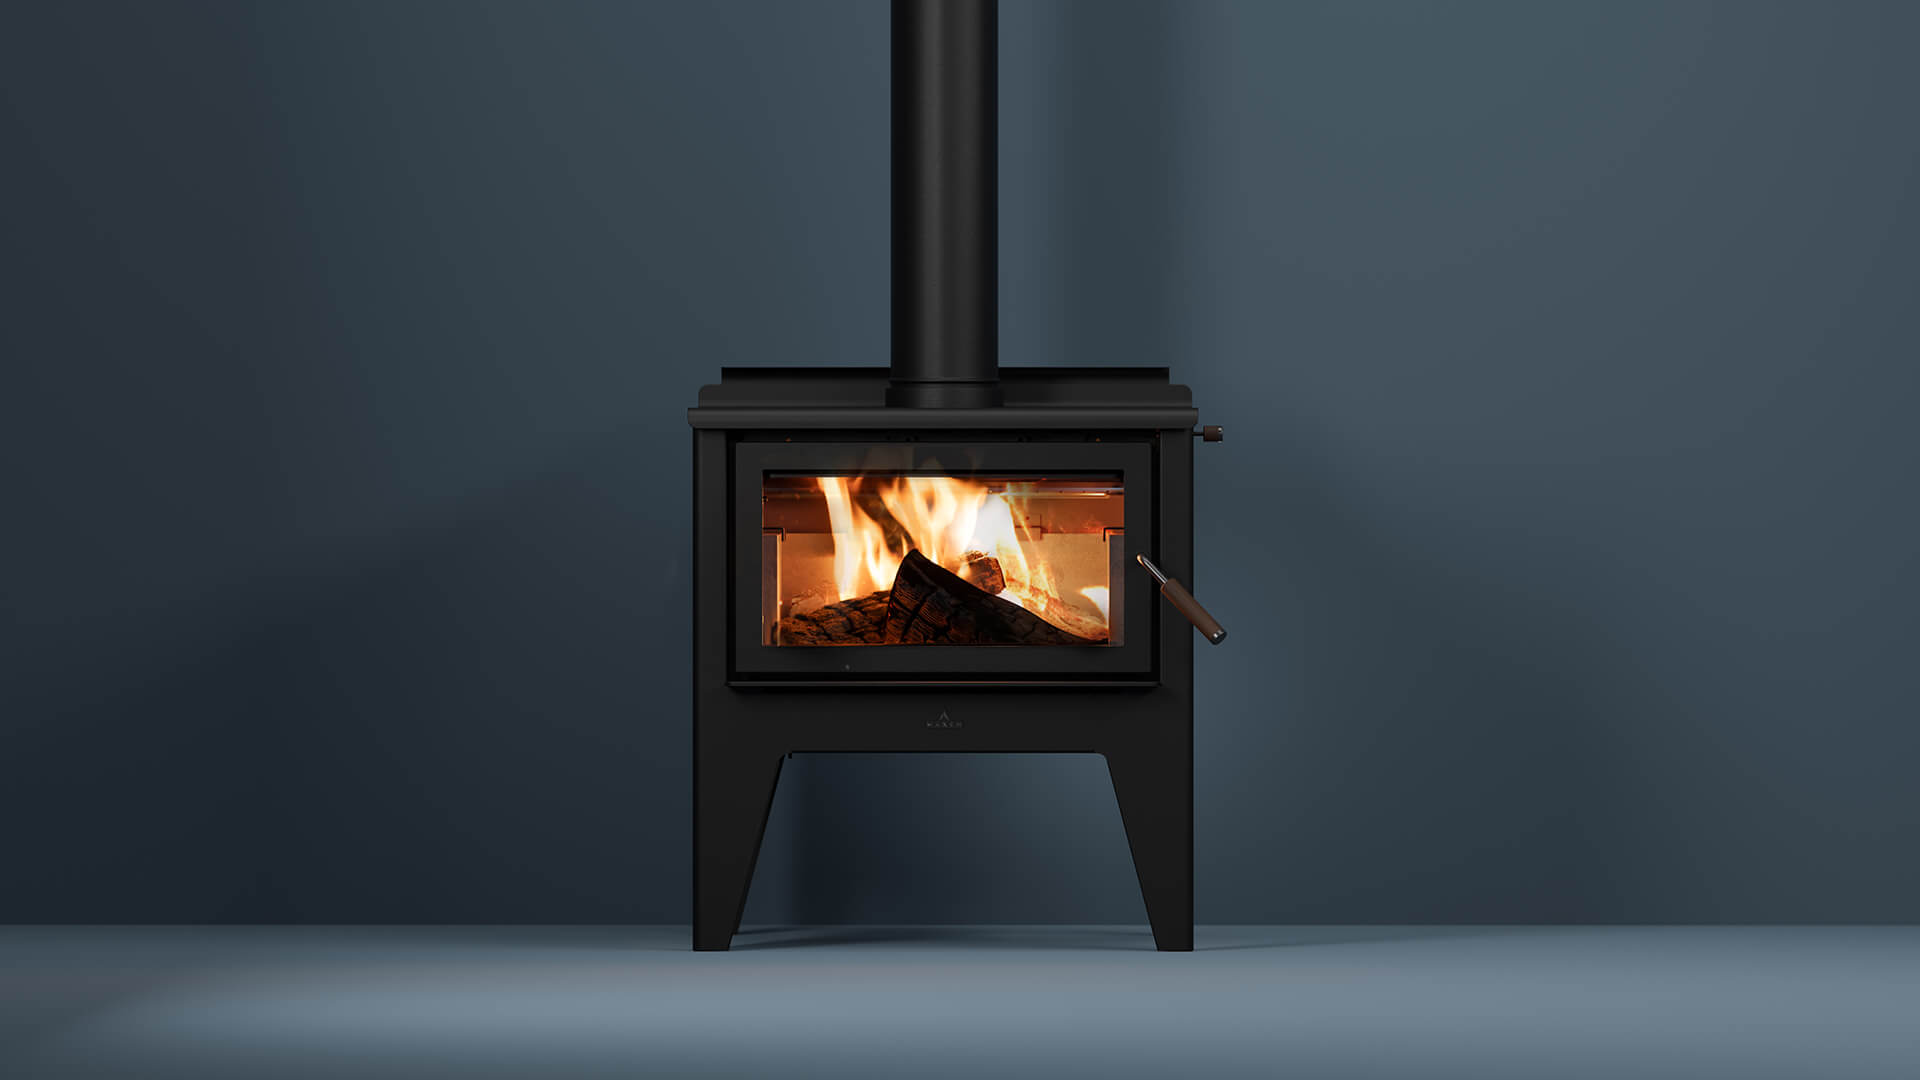 Maxen Kinmont 450 with Leg Base Wood Fireplace in navy coloured room